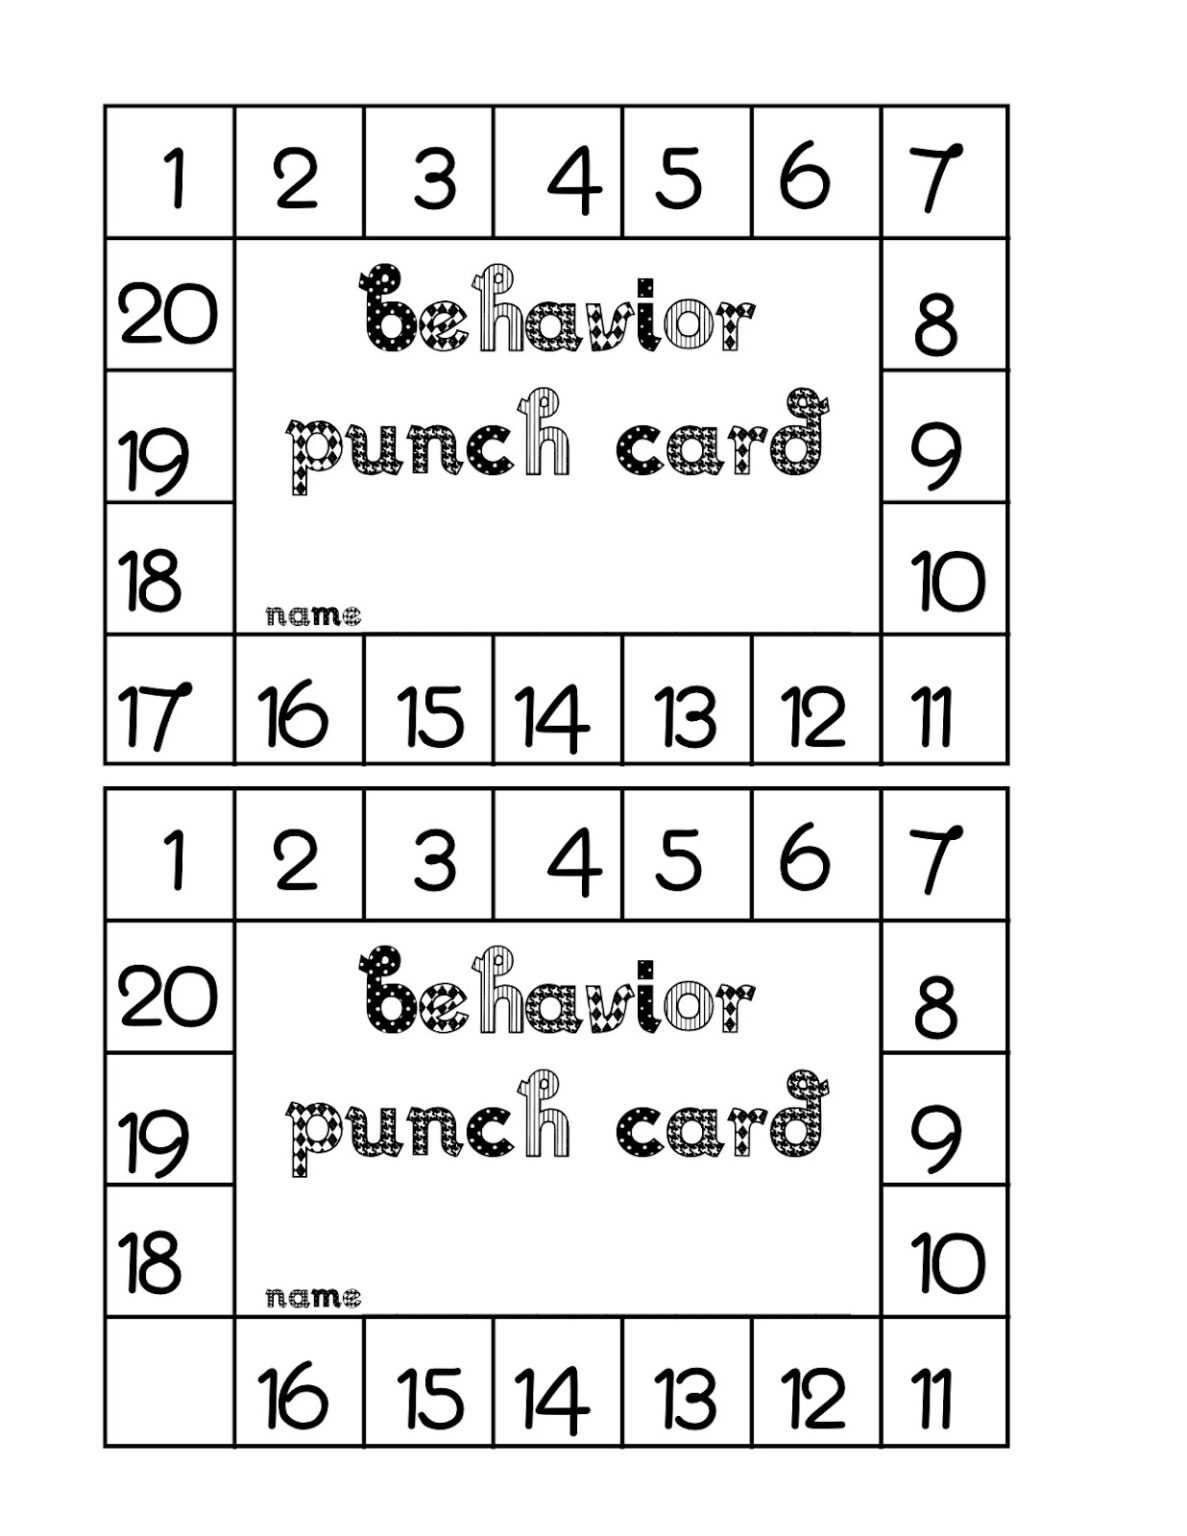 Free Printable Punch Card Template